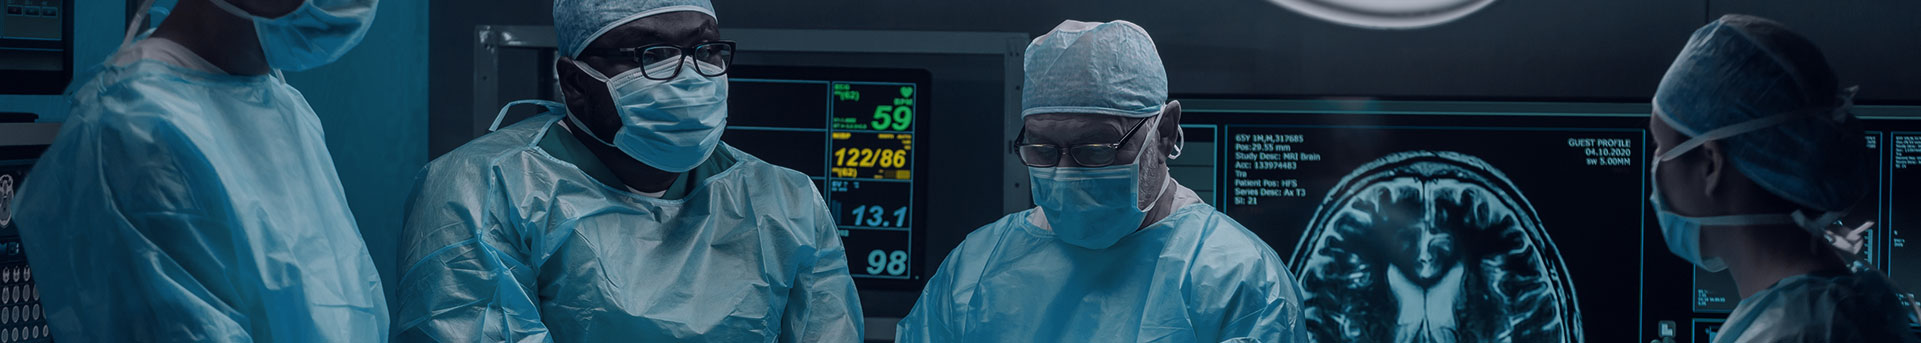 Surgeons with multiple monitors